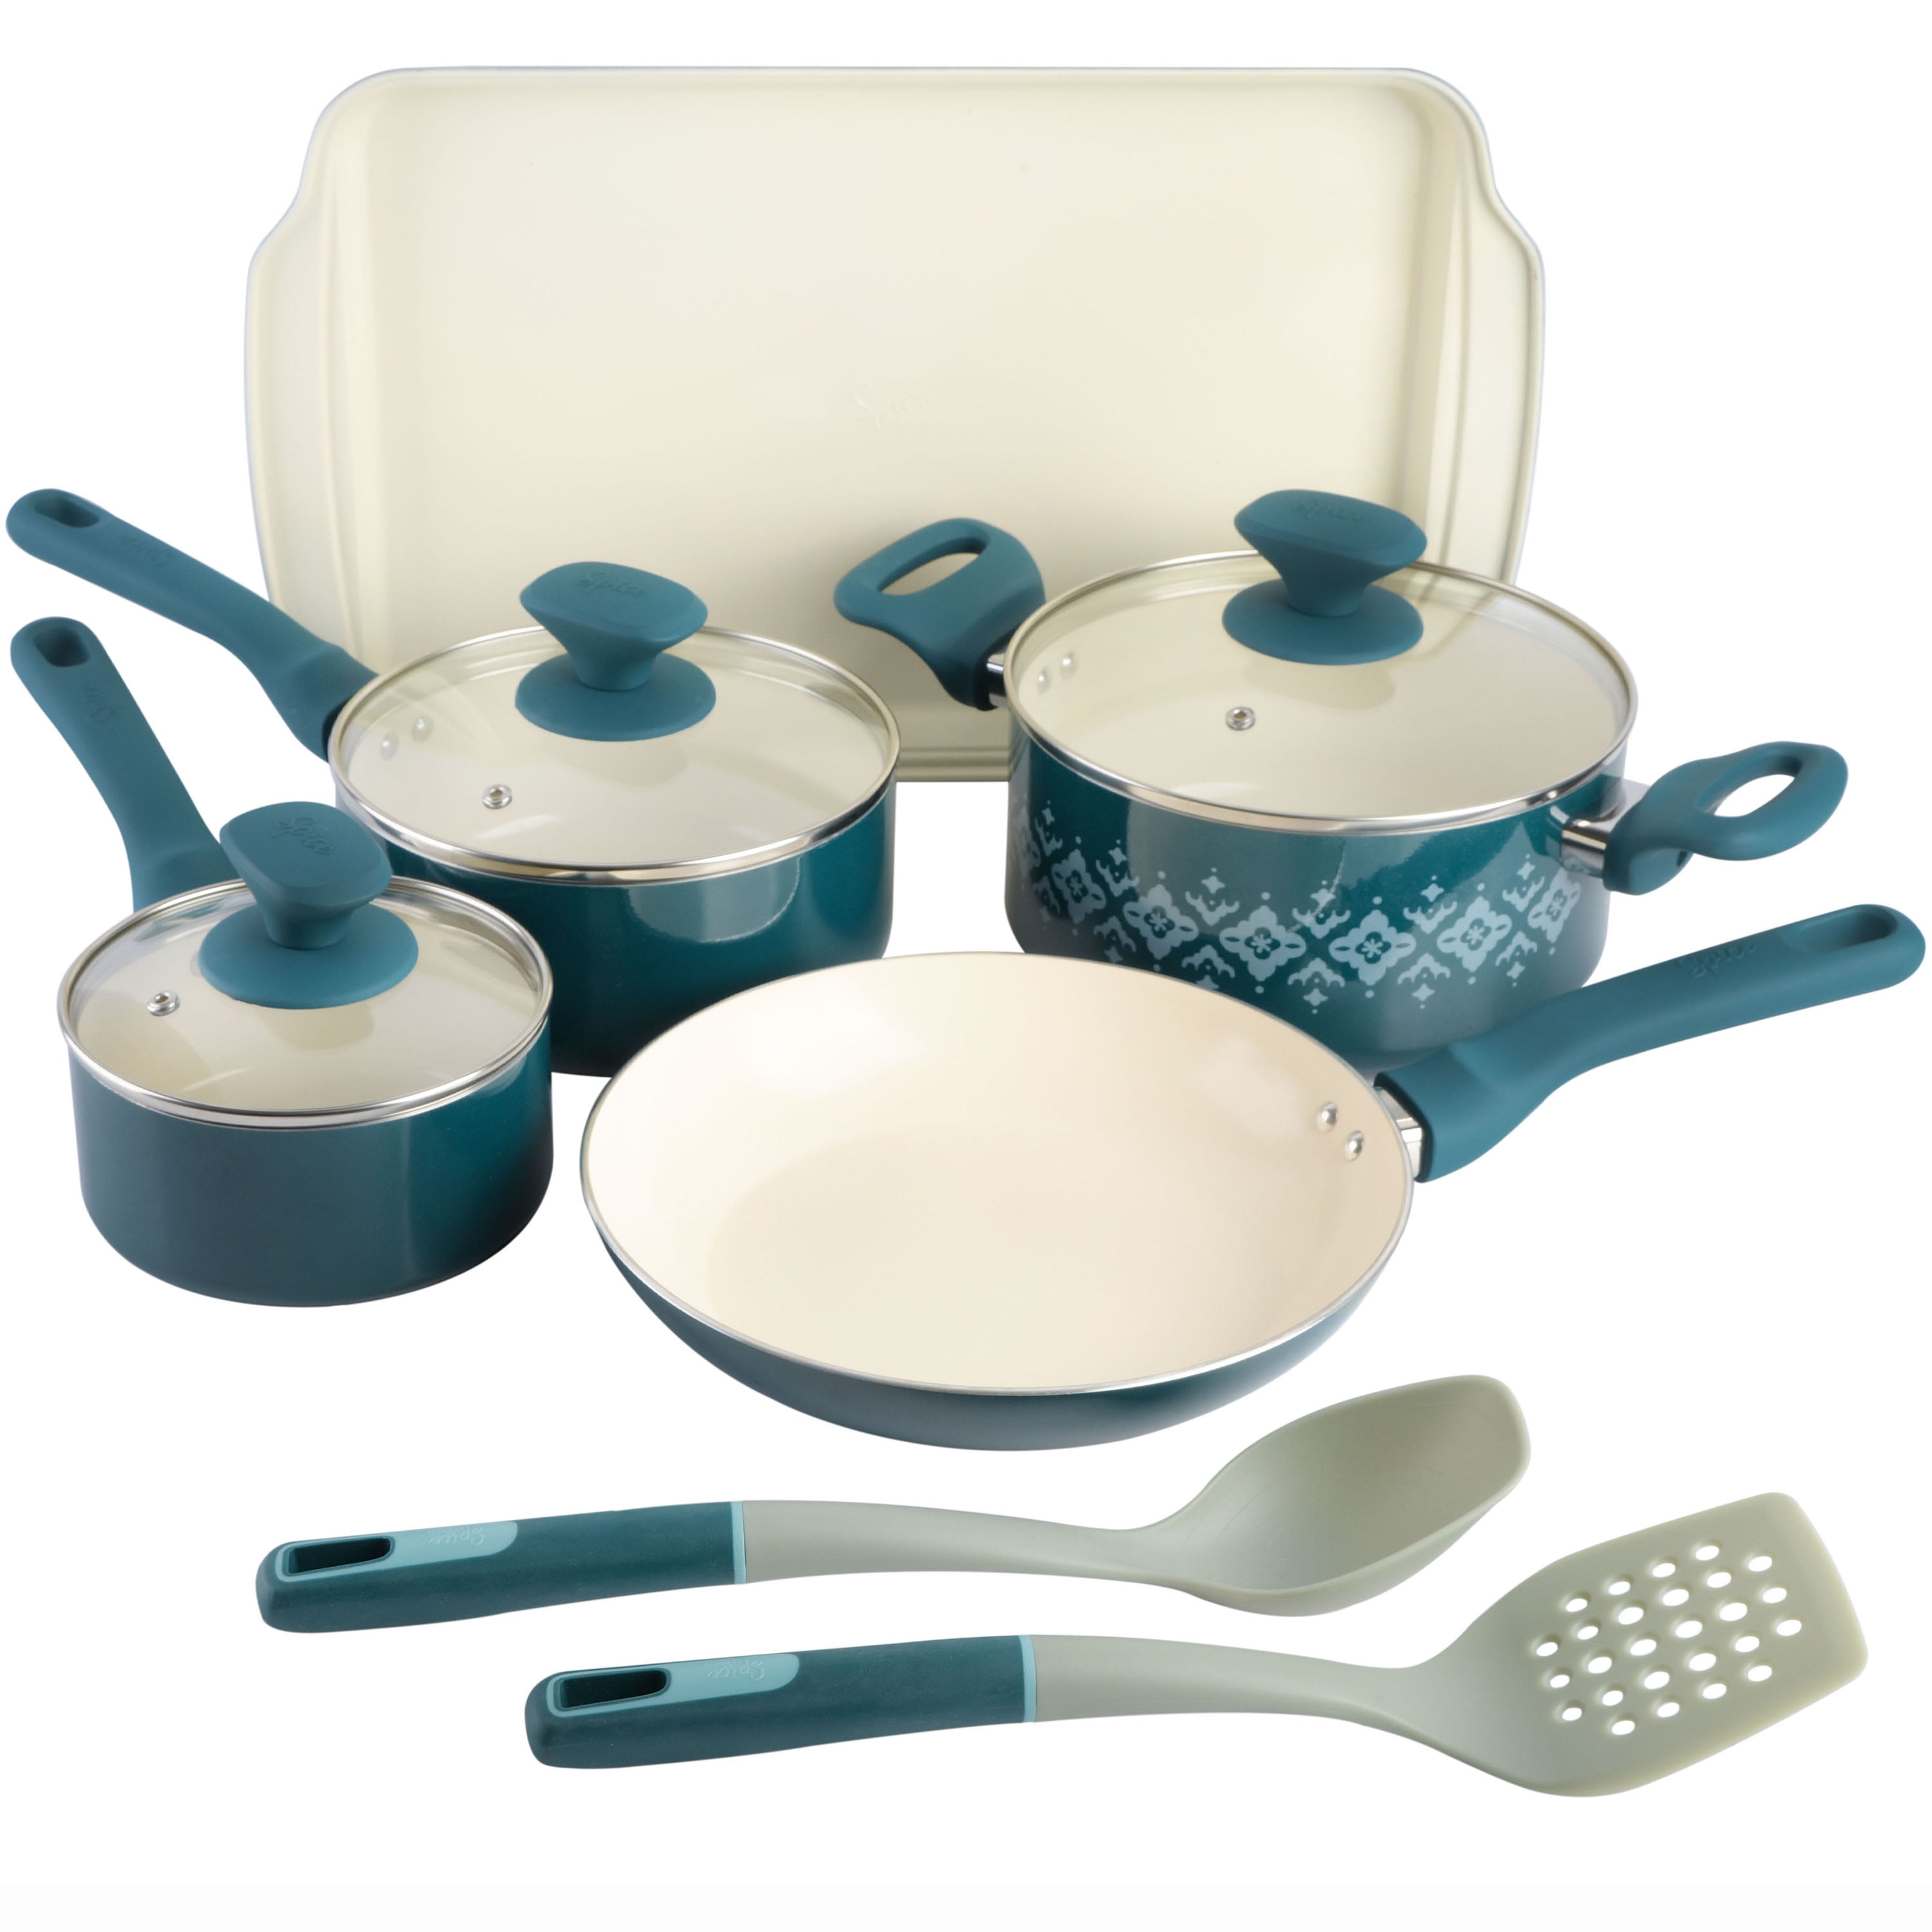 Our favorite HexClad cookware set is $300 off right now